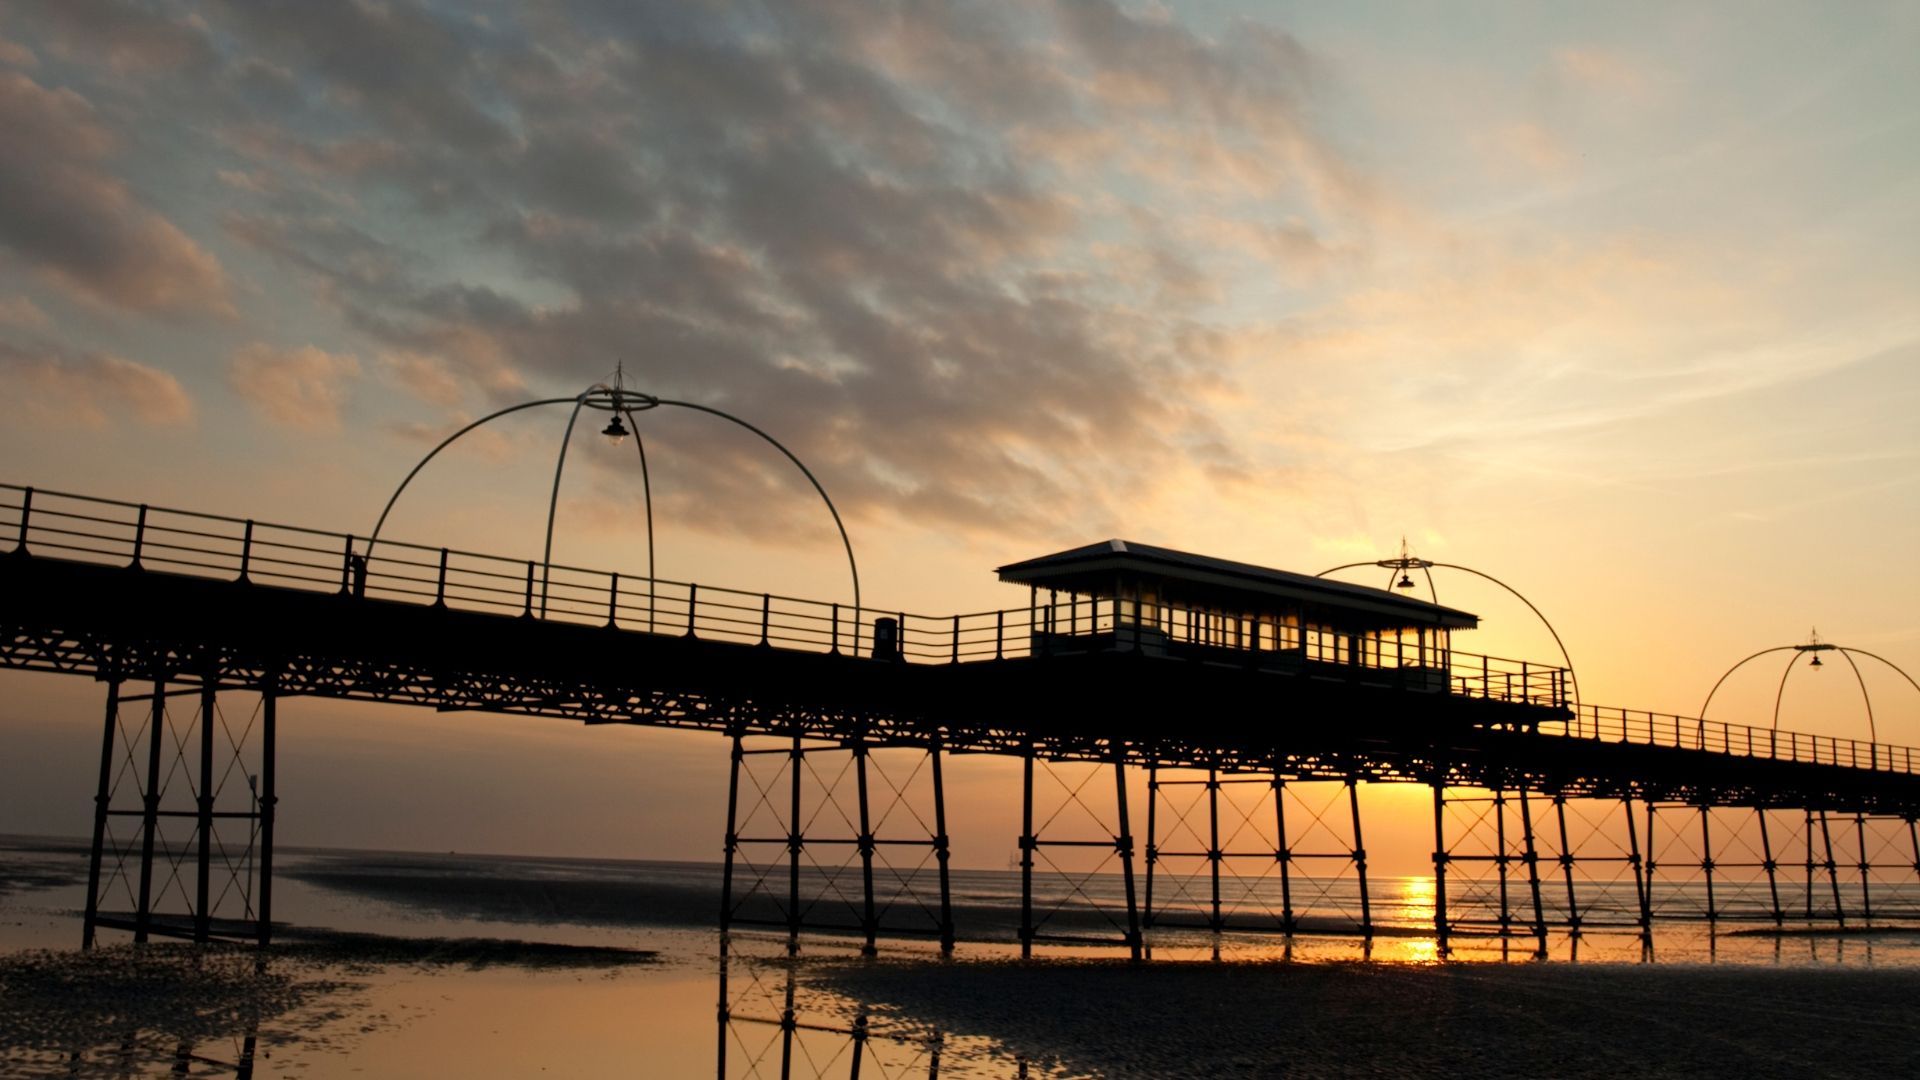 Dive into the history of Southport. Discover the origins of this seaside town with our step-by-step 